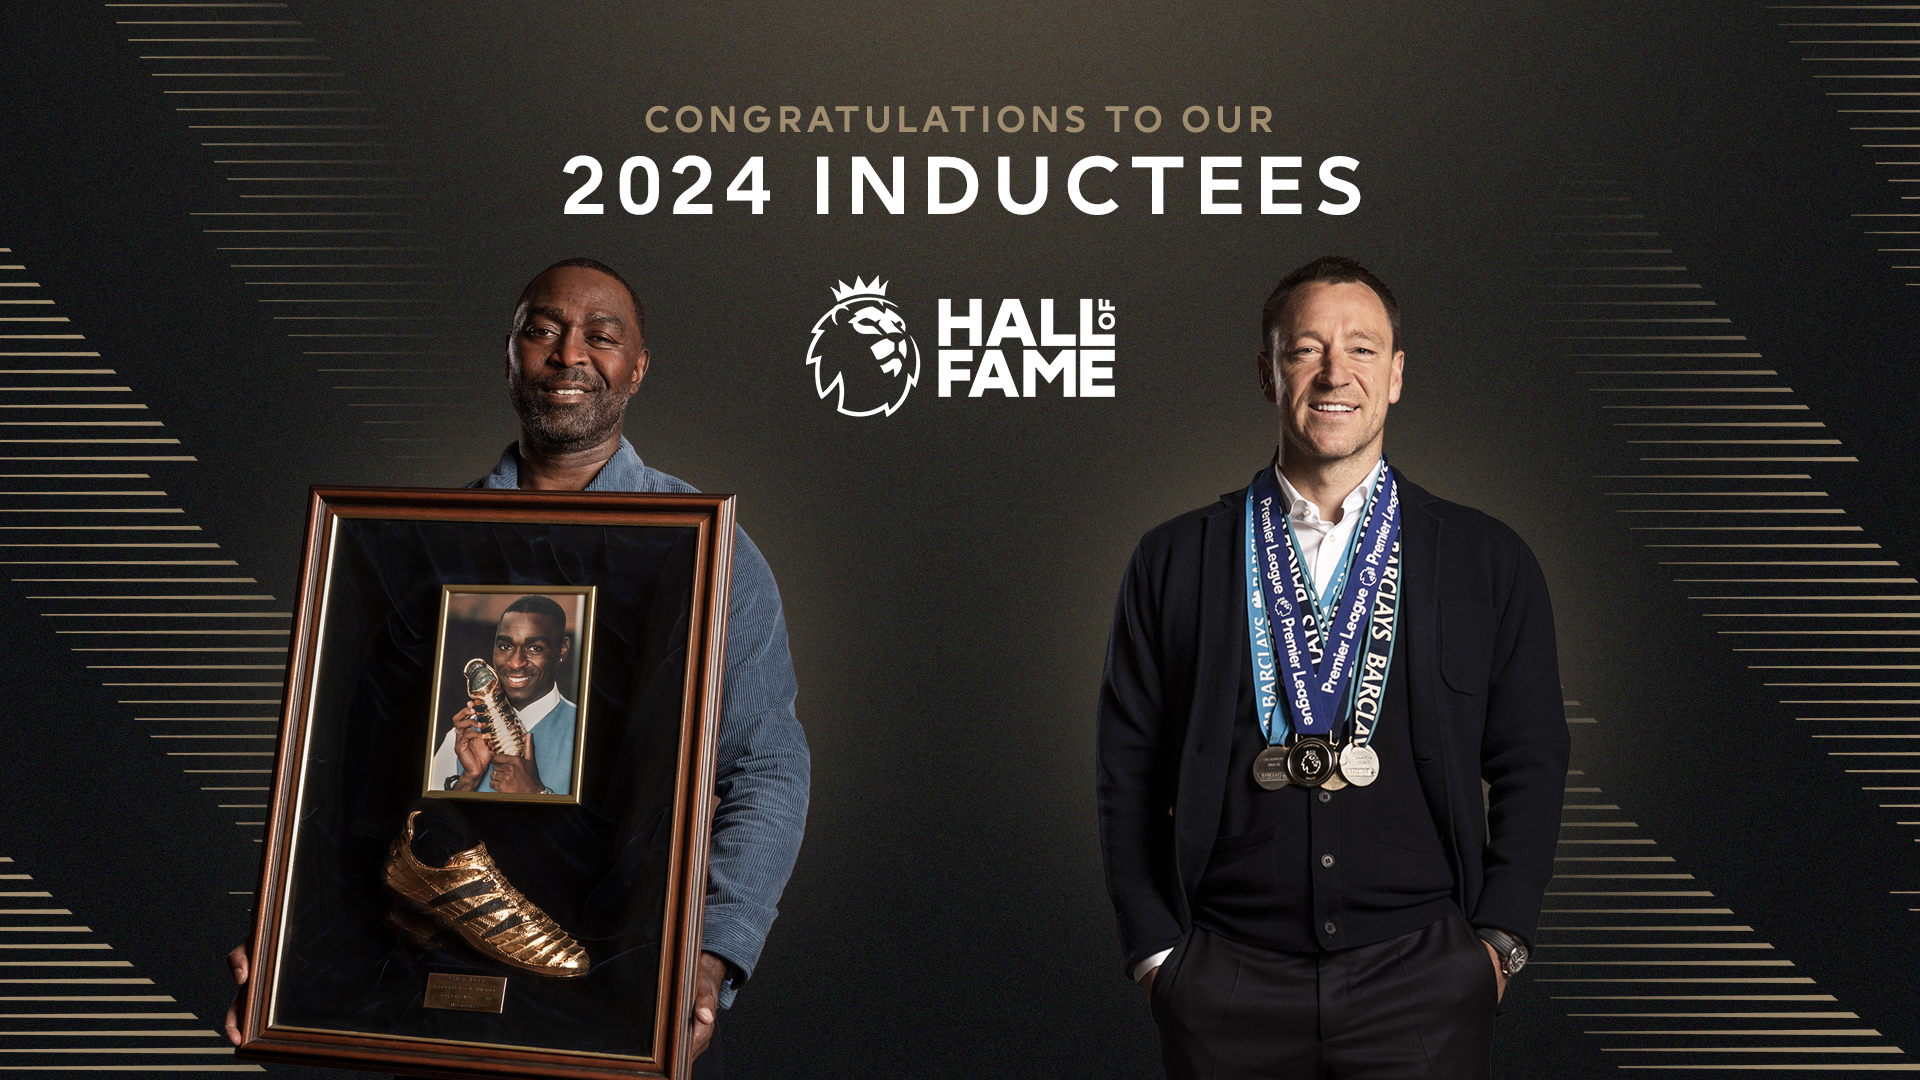 Andrew Cole and John Terry inducted into Hall of Fame